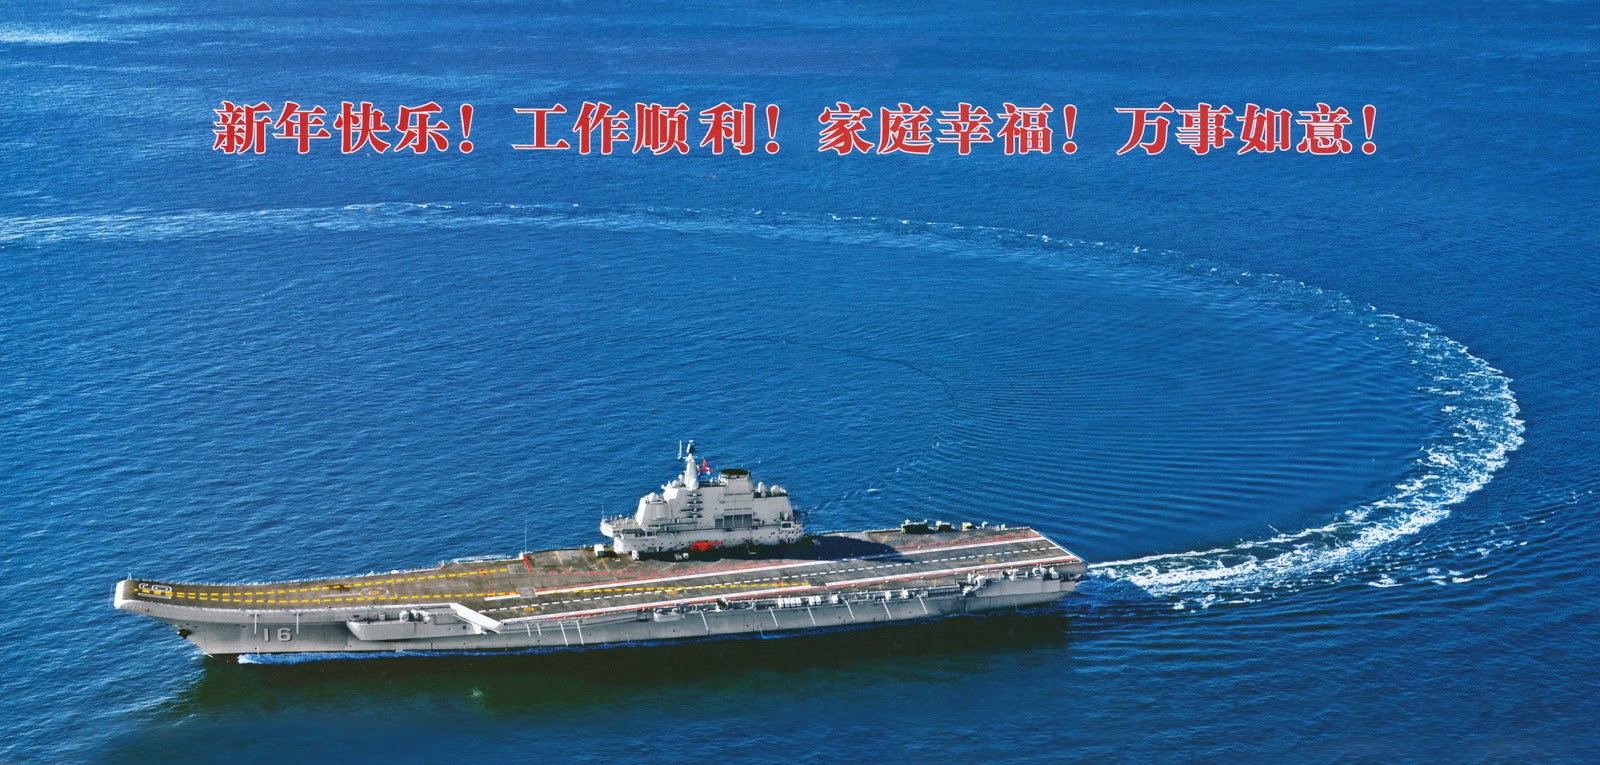 Armée Chinoise / People's Liberation Army (PLA) J-15+flying+sharke+fighterChina++Aircraft+Carrier+Liaoning+CV16+j-15+16+17+22+21+31+z8+9+10+11+12+13fighter+jet+aewc+PLA+NAVY+PLAAF+PLANAF+LANDING+TAKEOFF+(2)